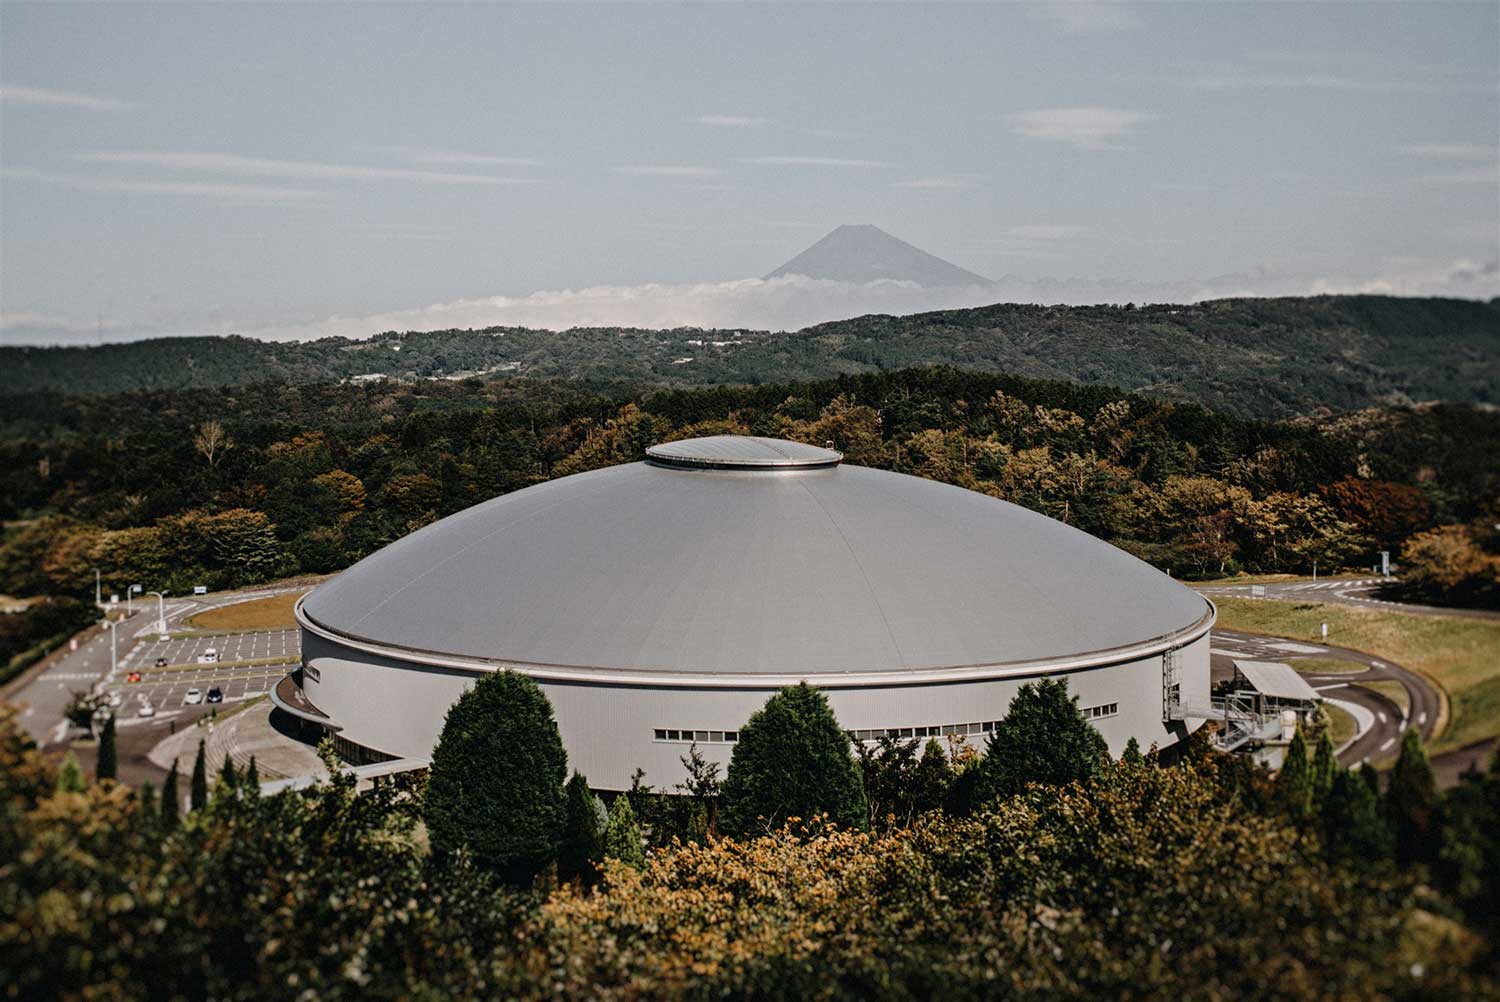 Exterior view of Izu Velodrome sitting amongst the forest and Mount Fuji in Japan